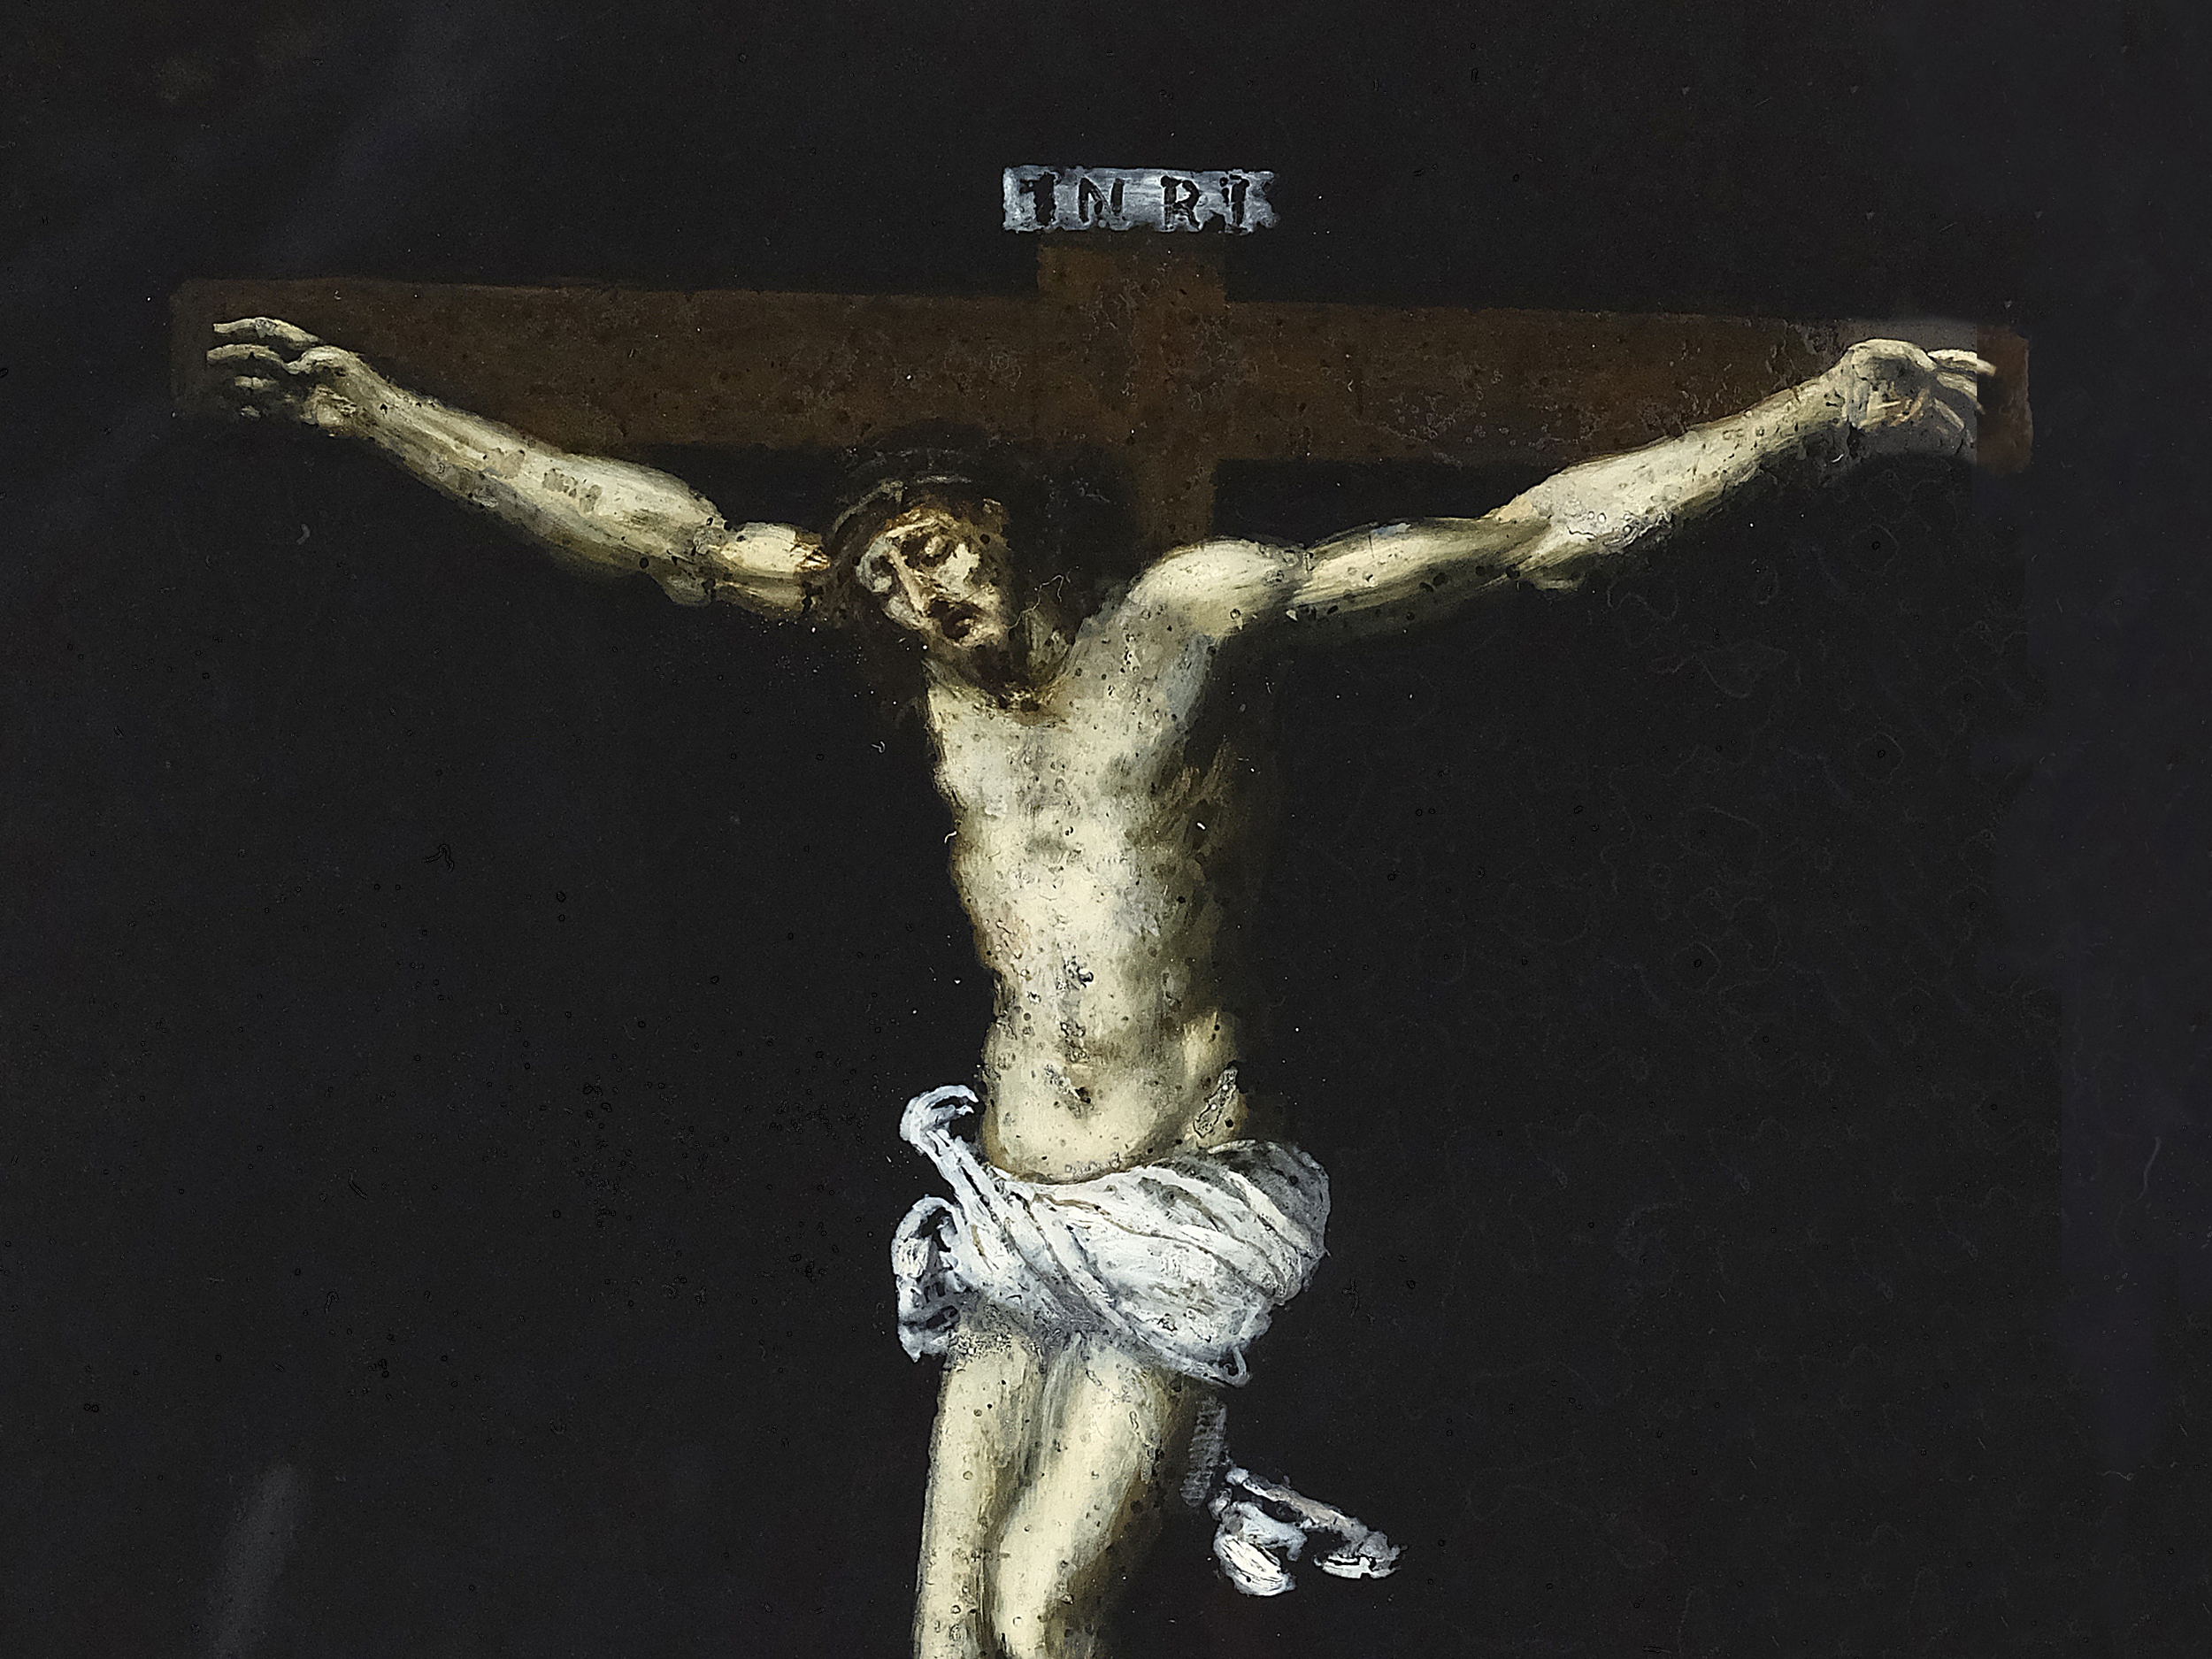 Unknown artist, Italy, 17th century, Crucifixion with Mary Magdalene - Image 2 of 3